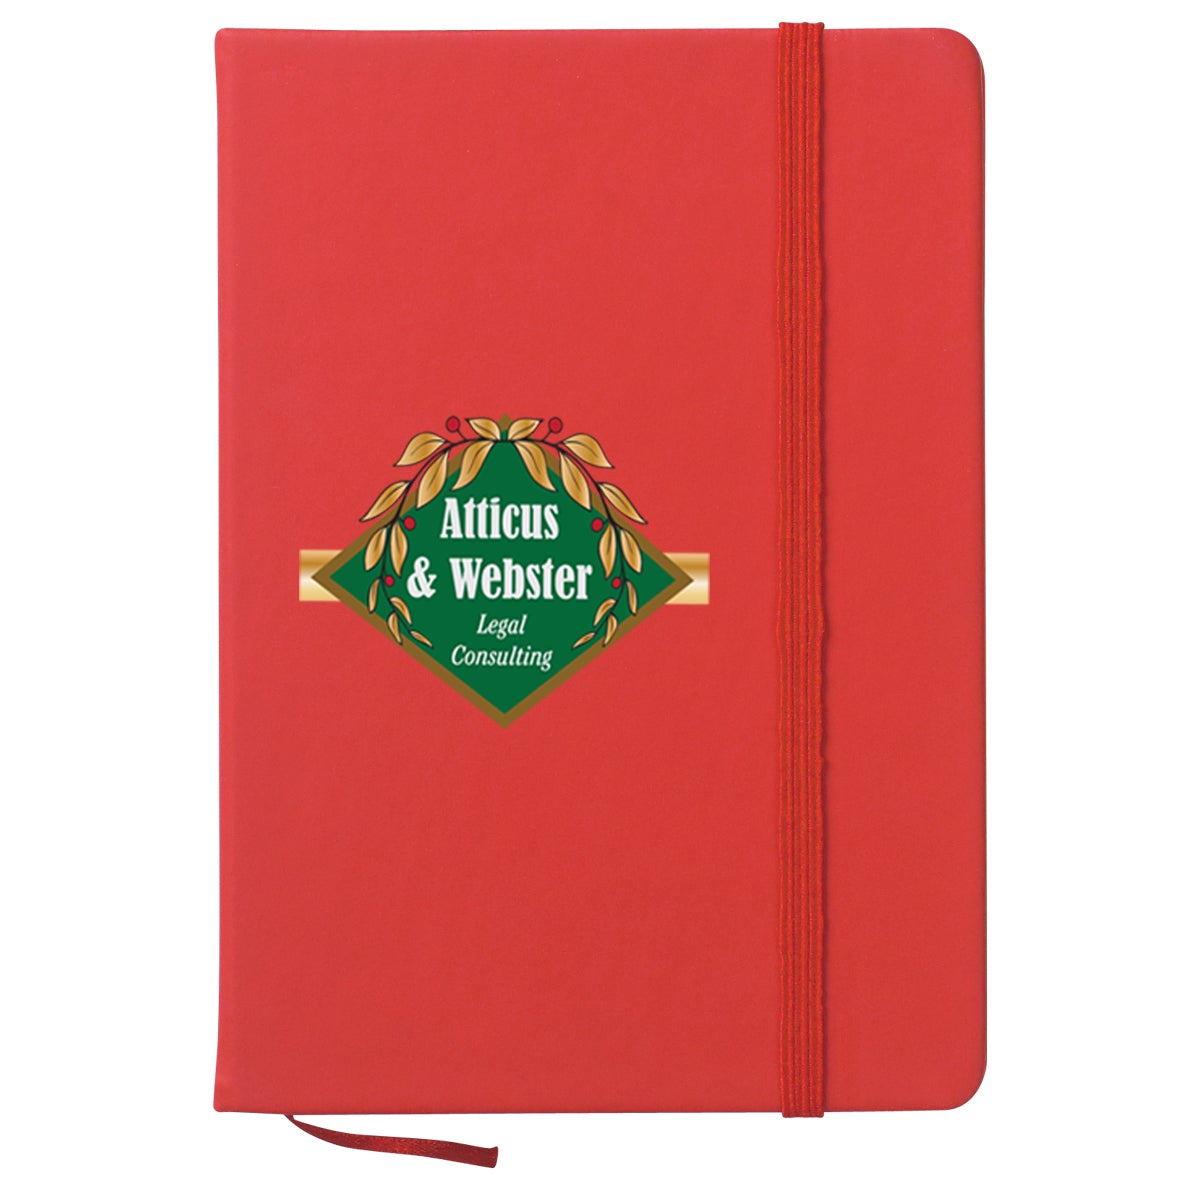 Journal Notebook Notebooks Hit Promo Red Multi Color 